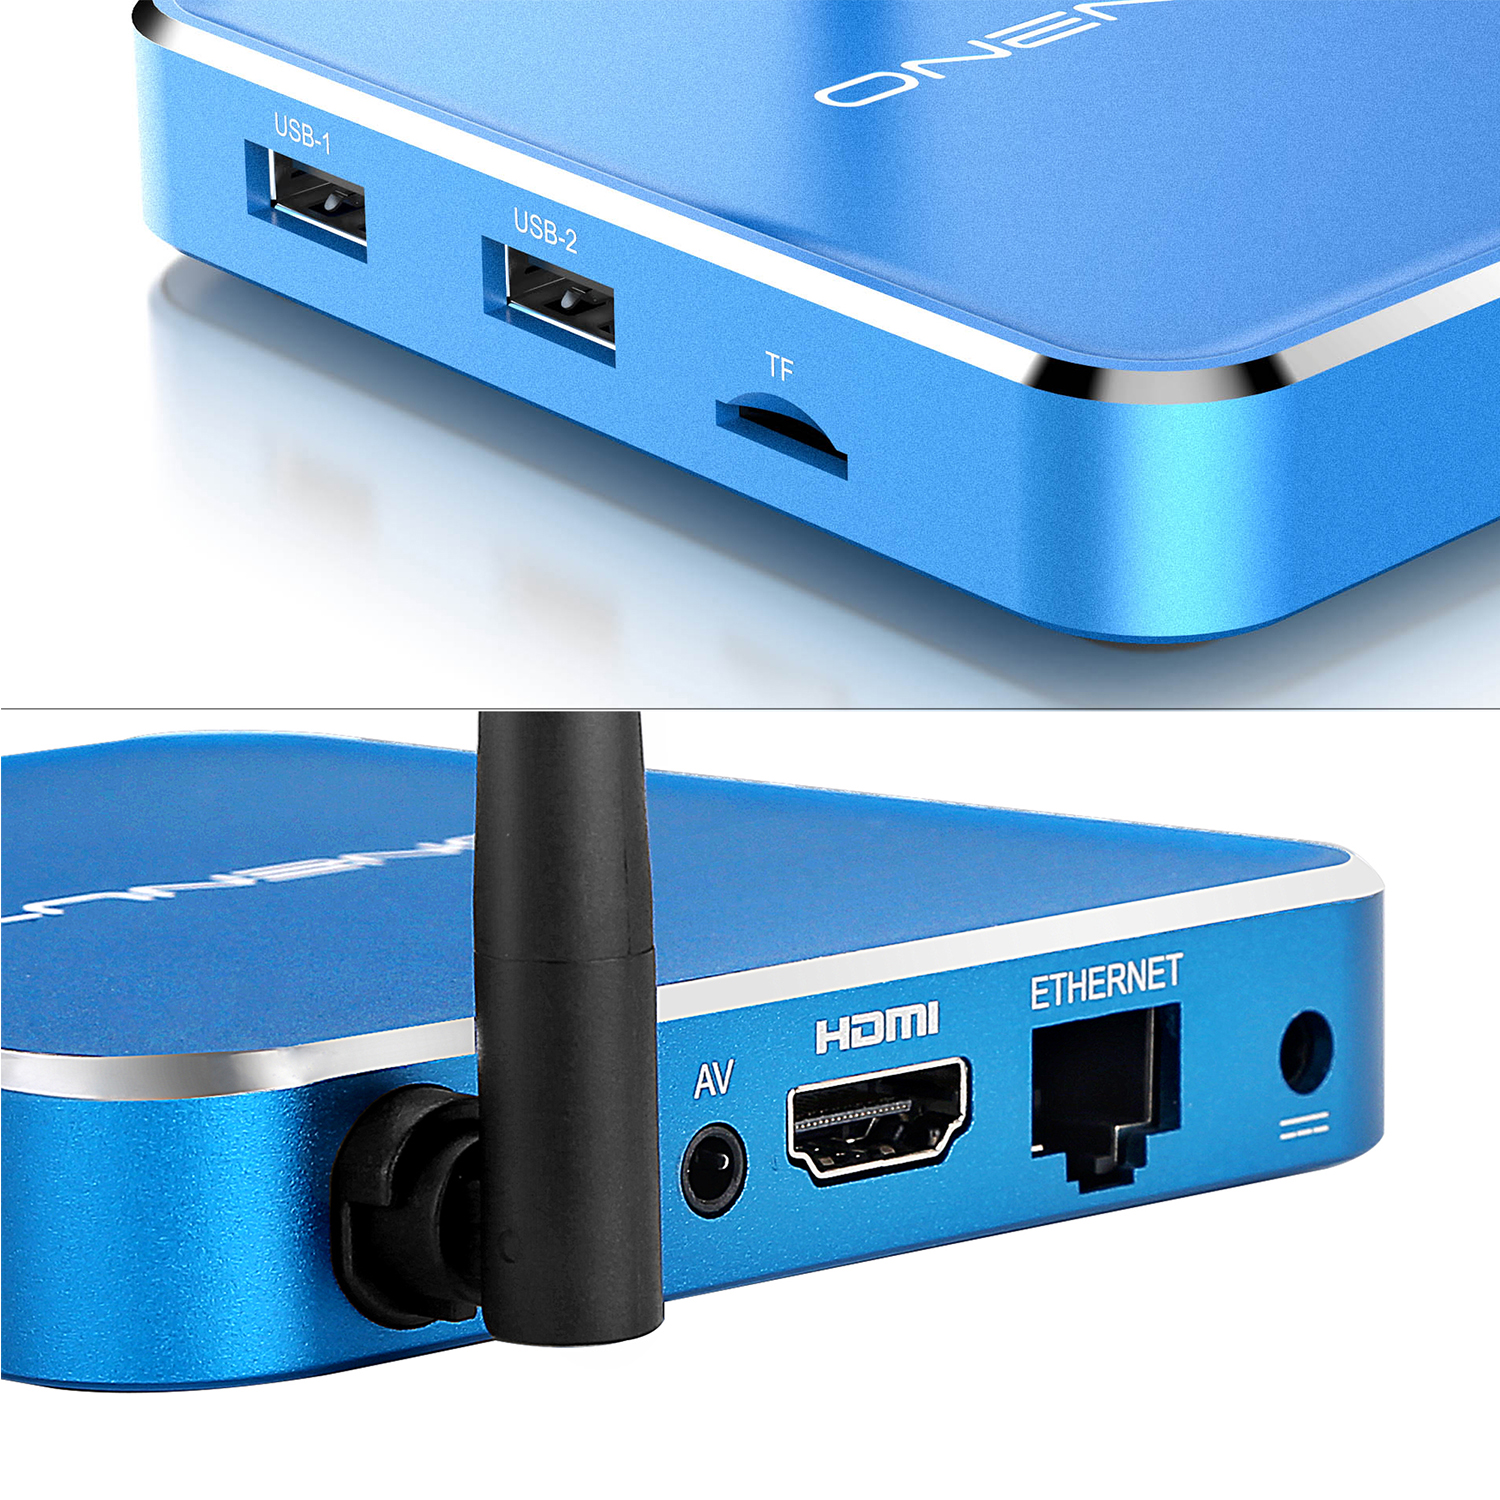 Android TV Box Manufacturer Android TV Box Wholesales China